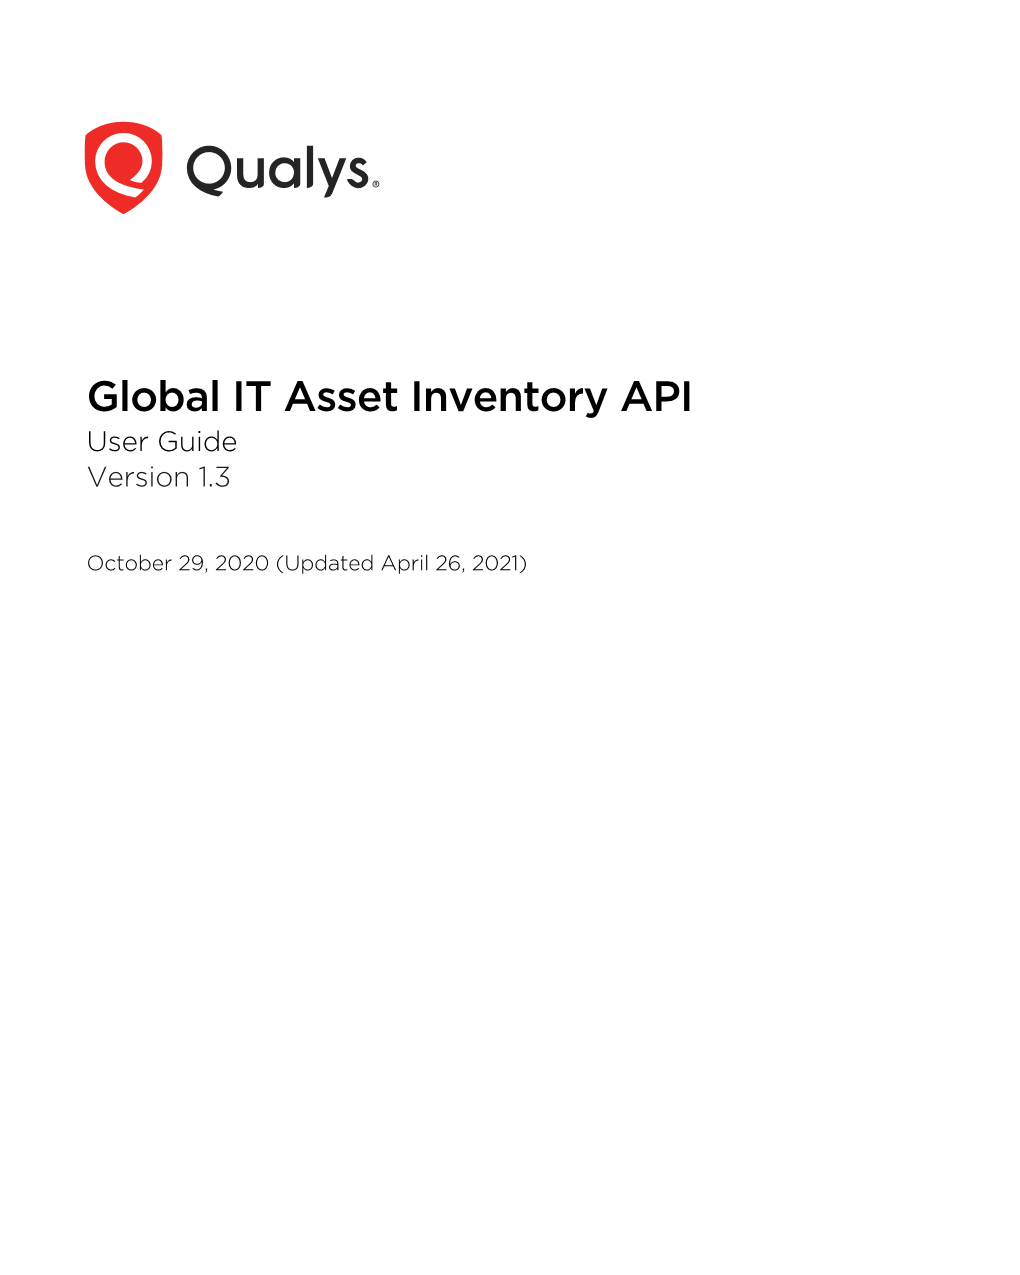 Qualys Global IT Asset Inventory API User Guide